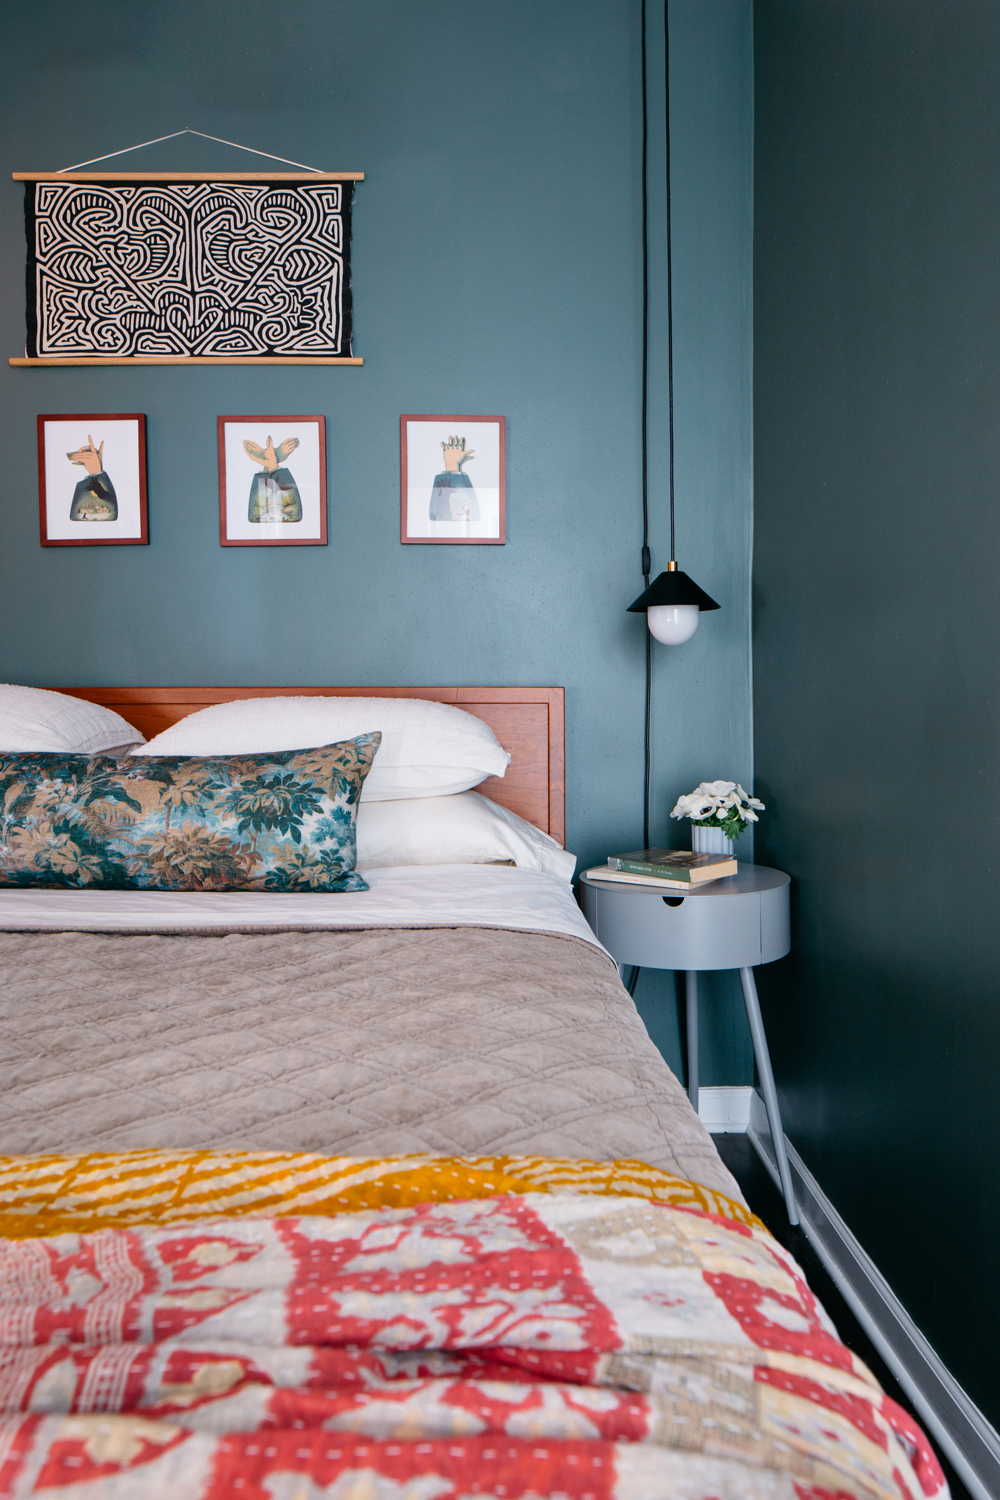 A green bedroom with eclectic art and bed linens in a variety of colors.